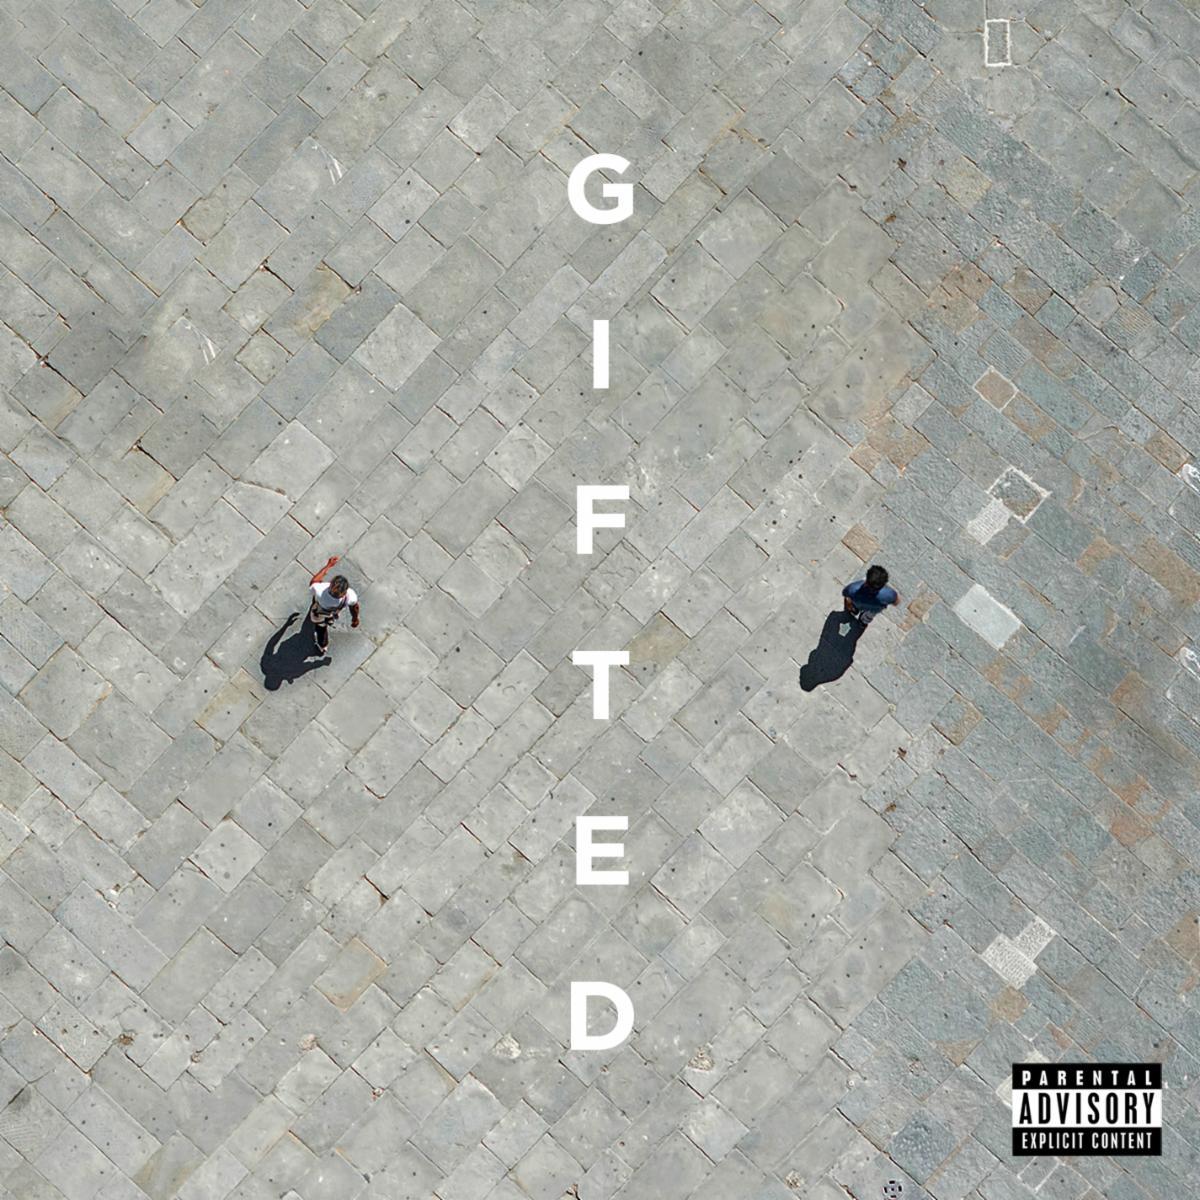 Cordae Feat. Roddy Ricch – “Gifted” [Audio]